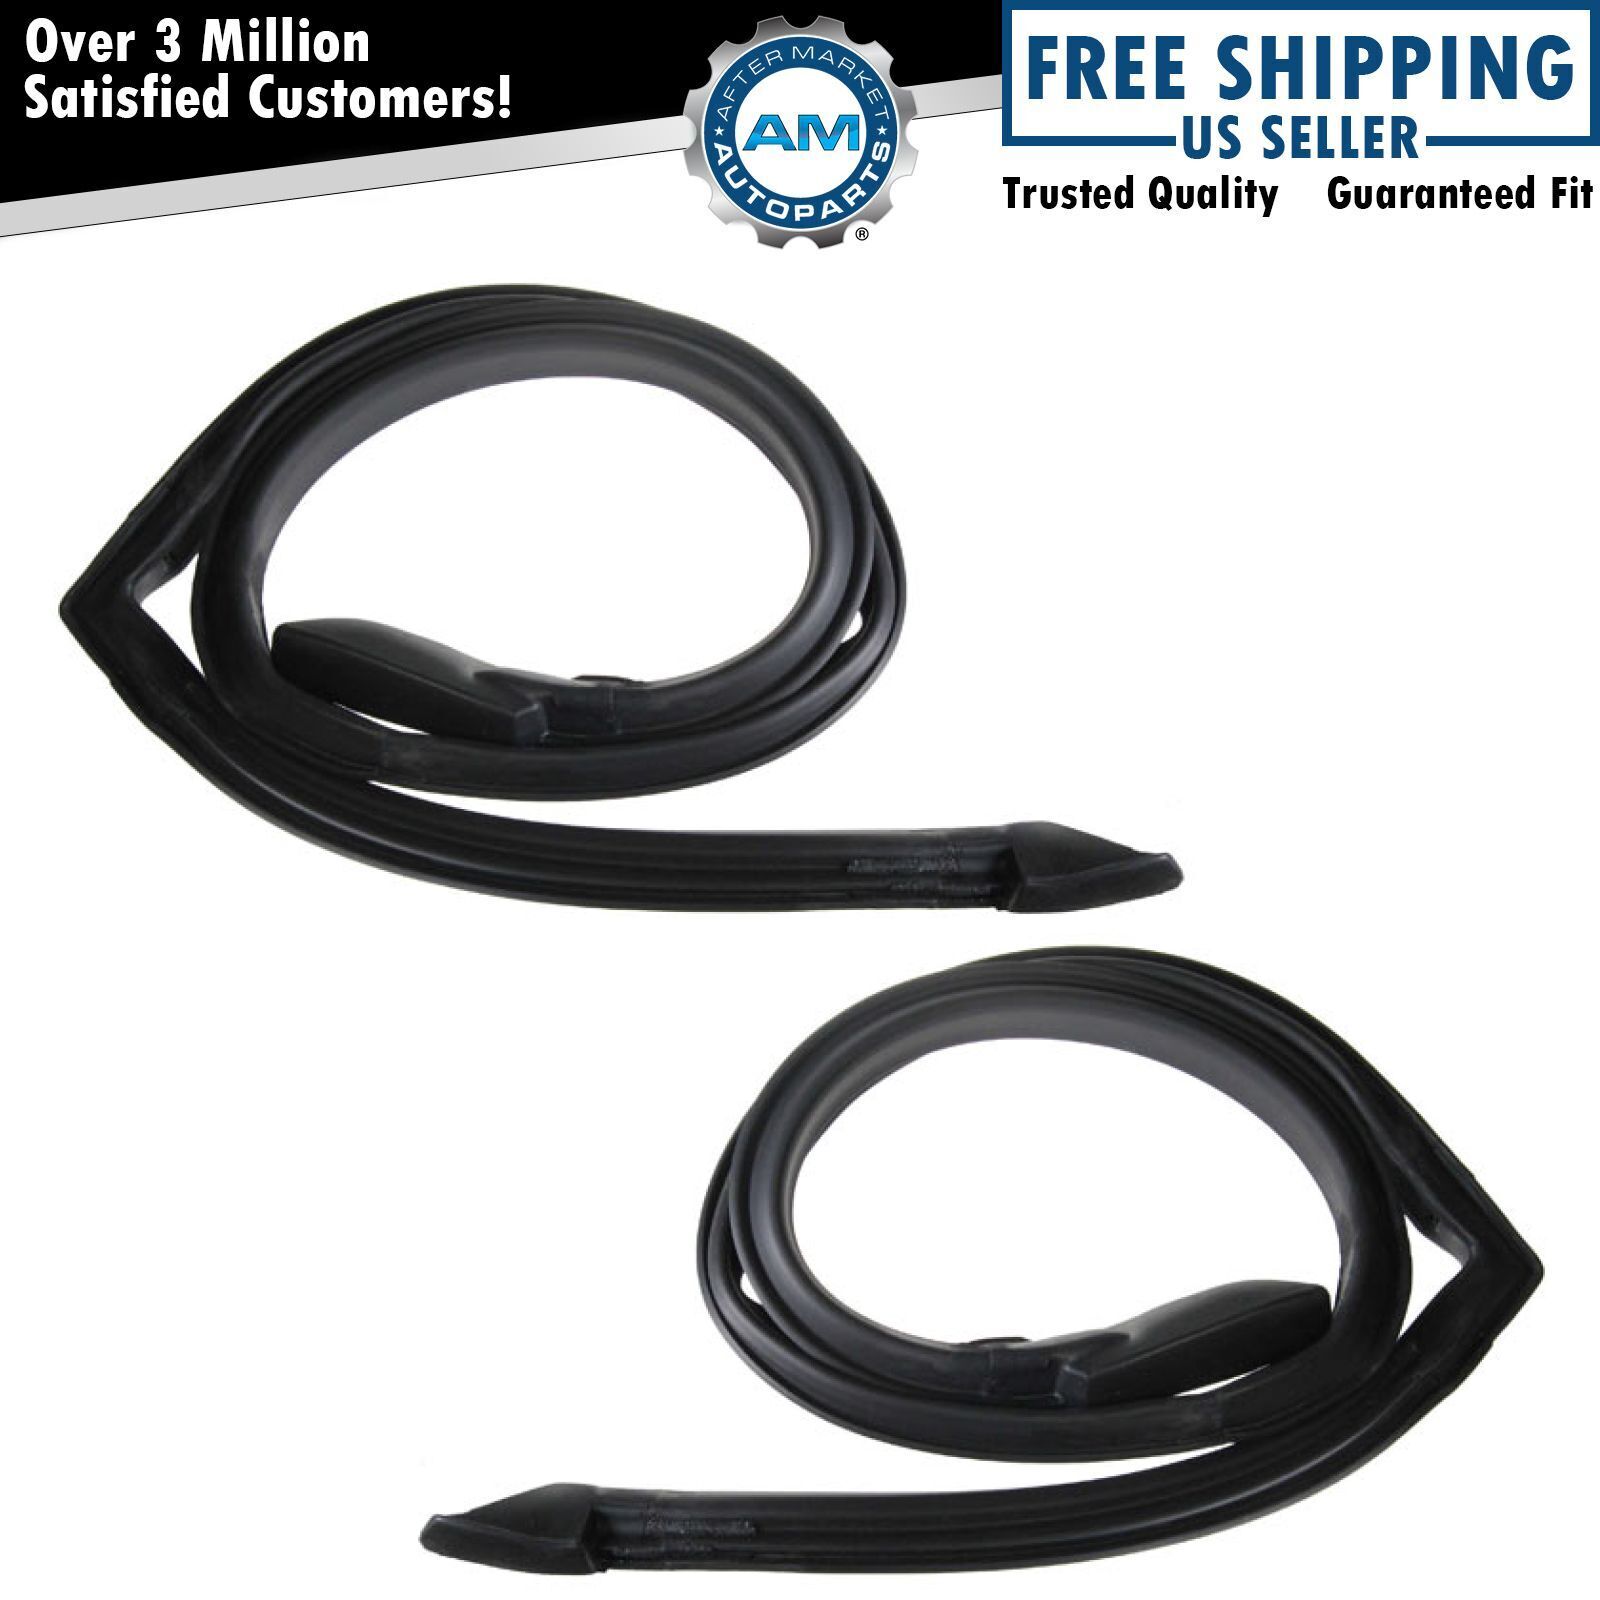 Roofrail Seals Rubber Weatherstrip Pair Set for Buick Grand Prix Chevy Cutlass